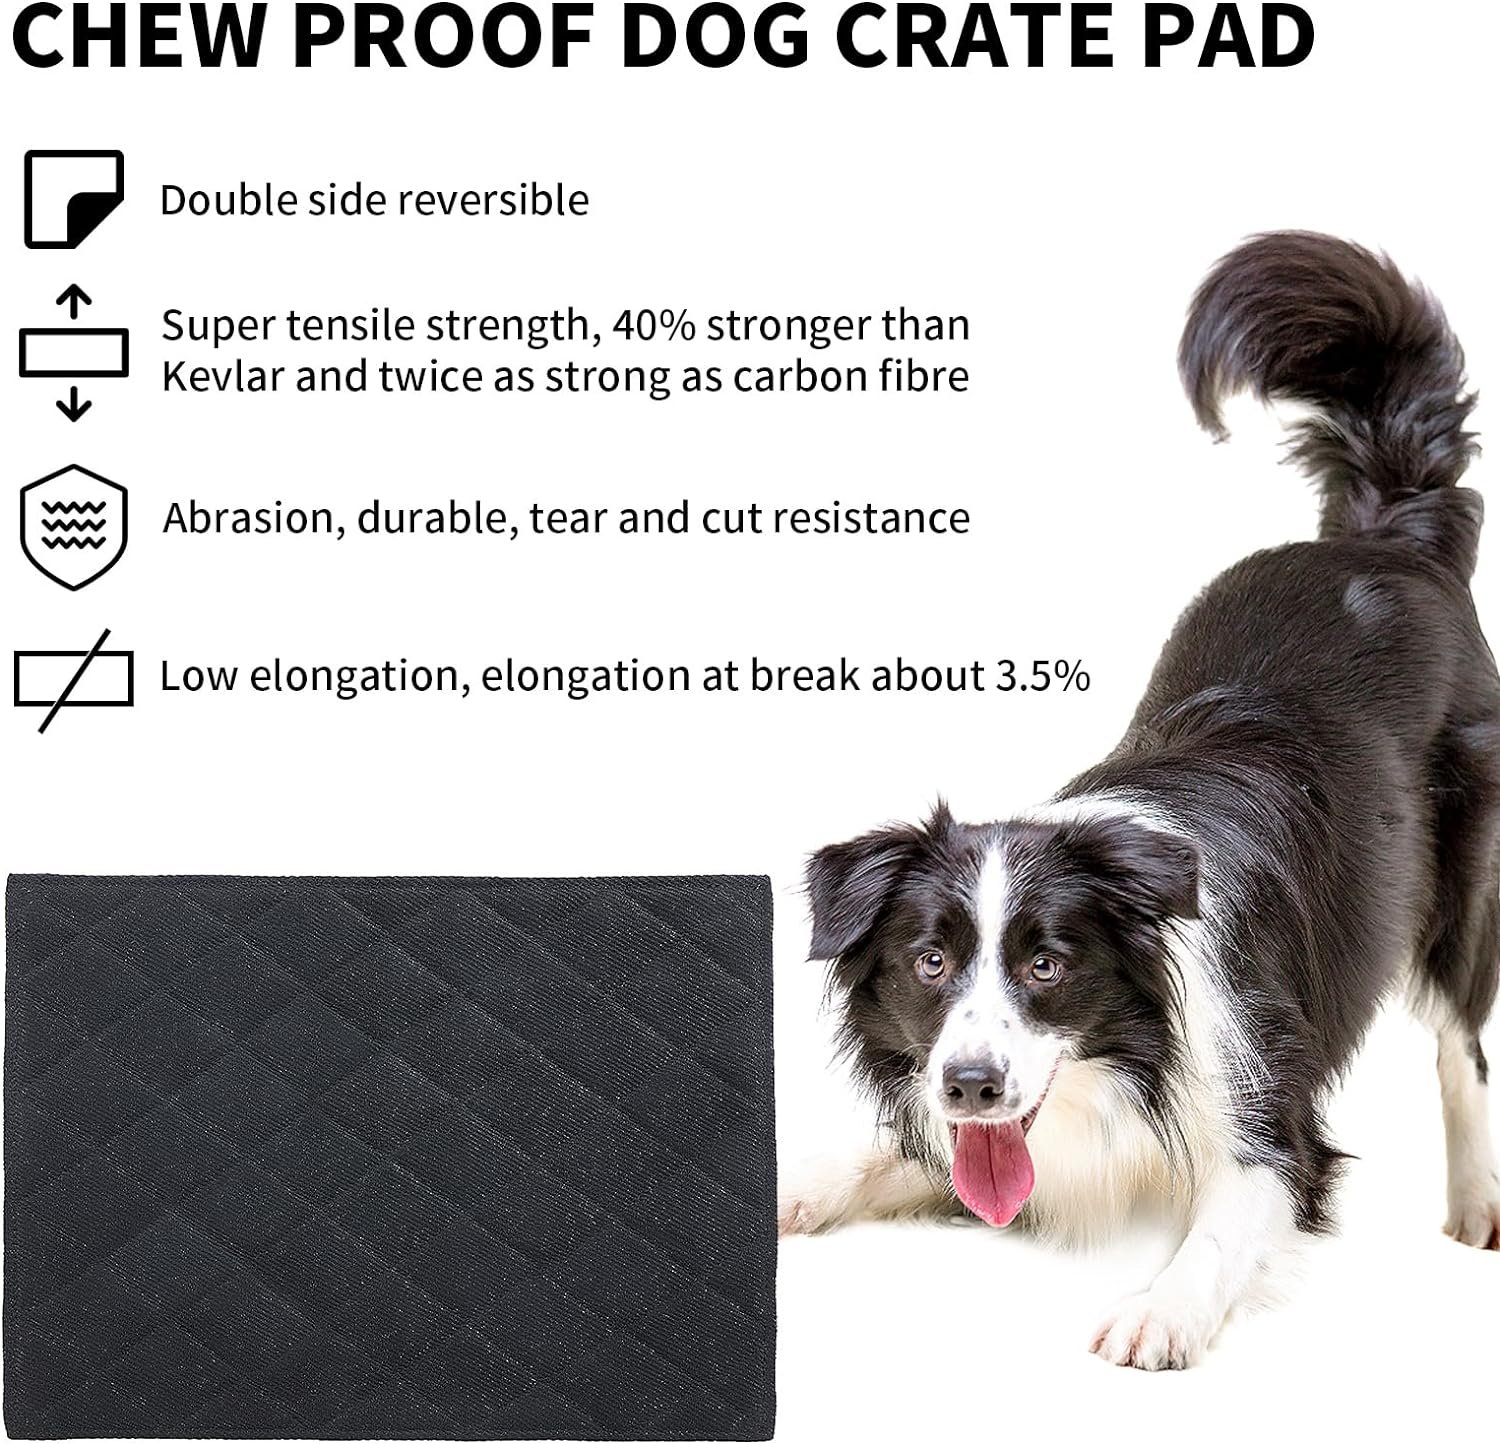 HOMBYS Chew Proof Dog Crate Pad Mat, 22x35 Indestructible Kennel Pad for Aggressive Chewers, Durable and Water Resistant Teething Puppy Crate Mats for Dogs Cages